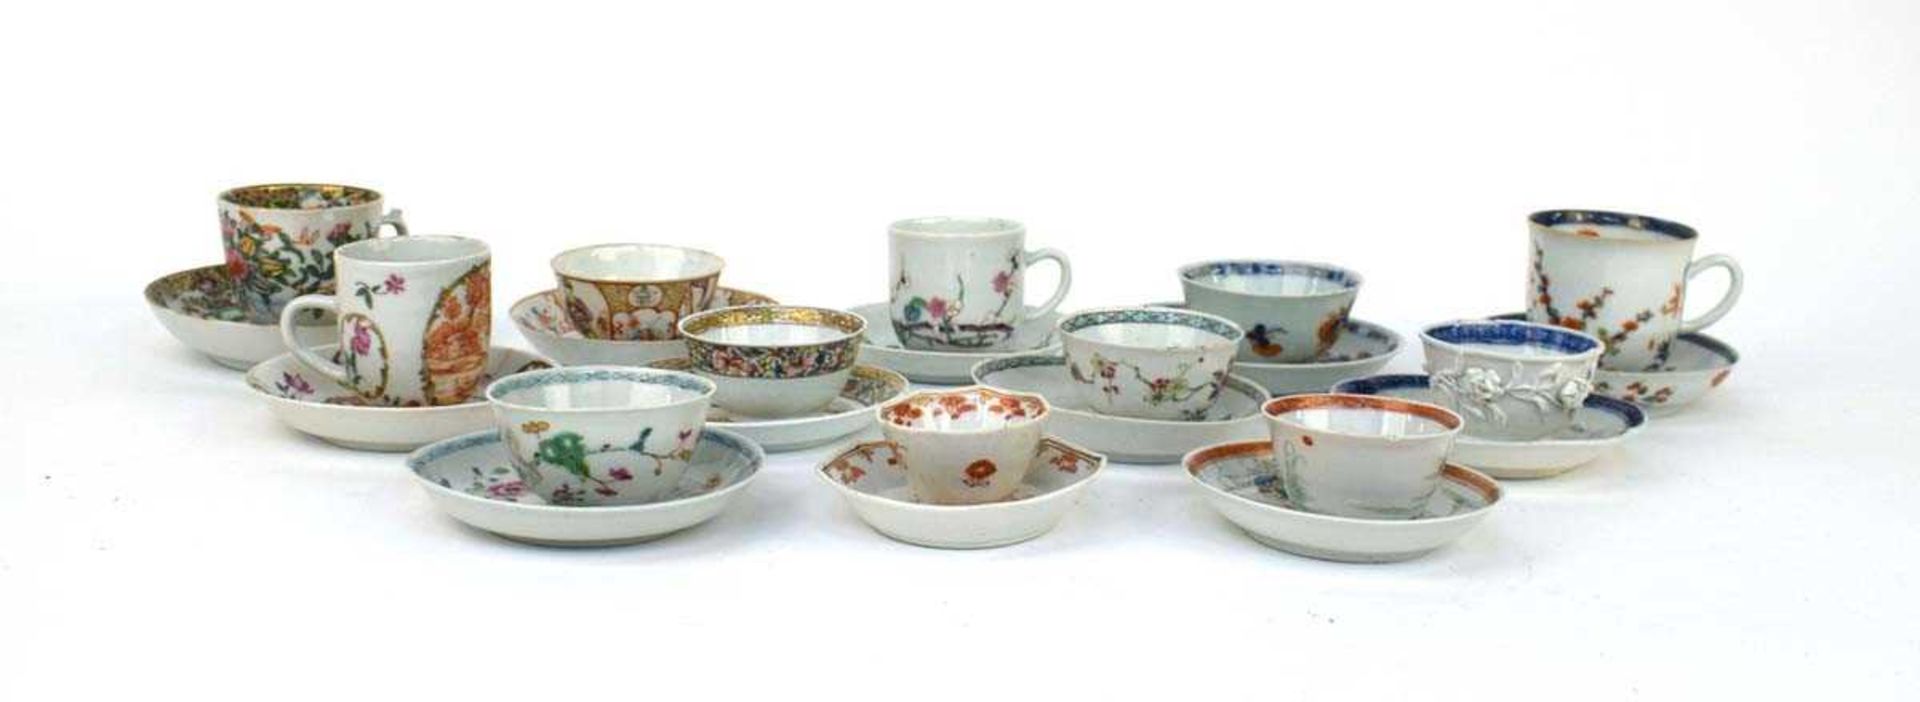 Twelve matching Chinese and other tea bowls, cups and saucers, each decorated in a different